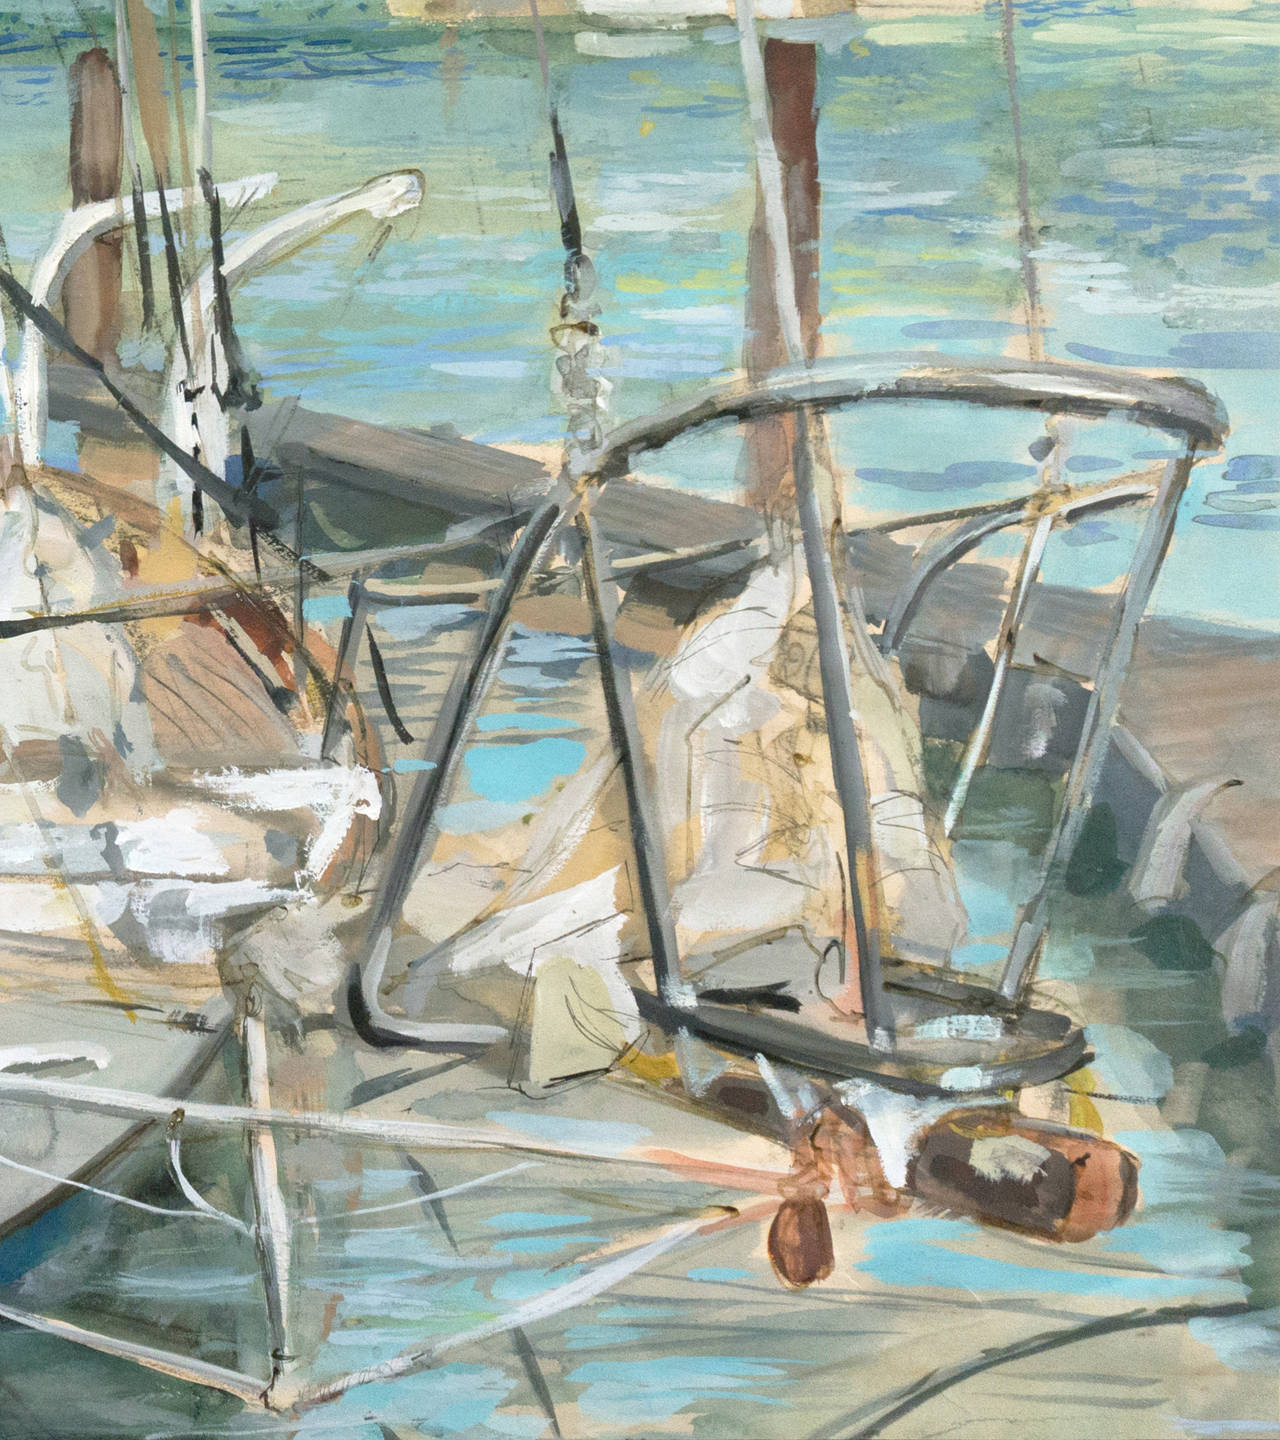 An attractive mid-century coastal scene showing a sailing boat resting in a calm berth on turquoise waters.

Signed lower left 